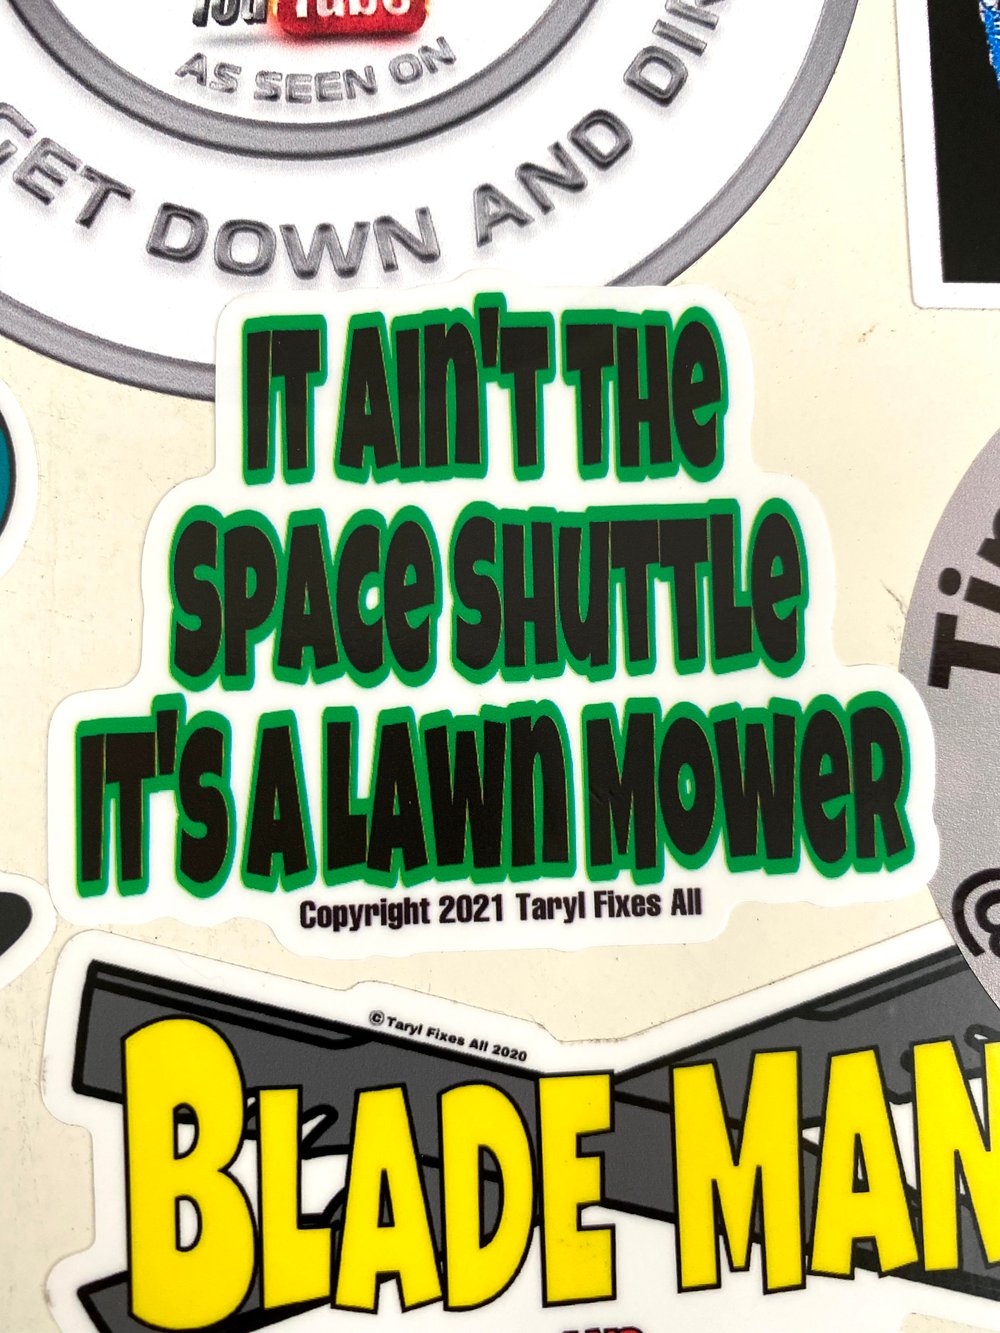 "It Ain’t The Space Shuttle” Stickers!! 